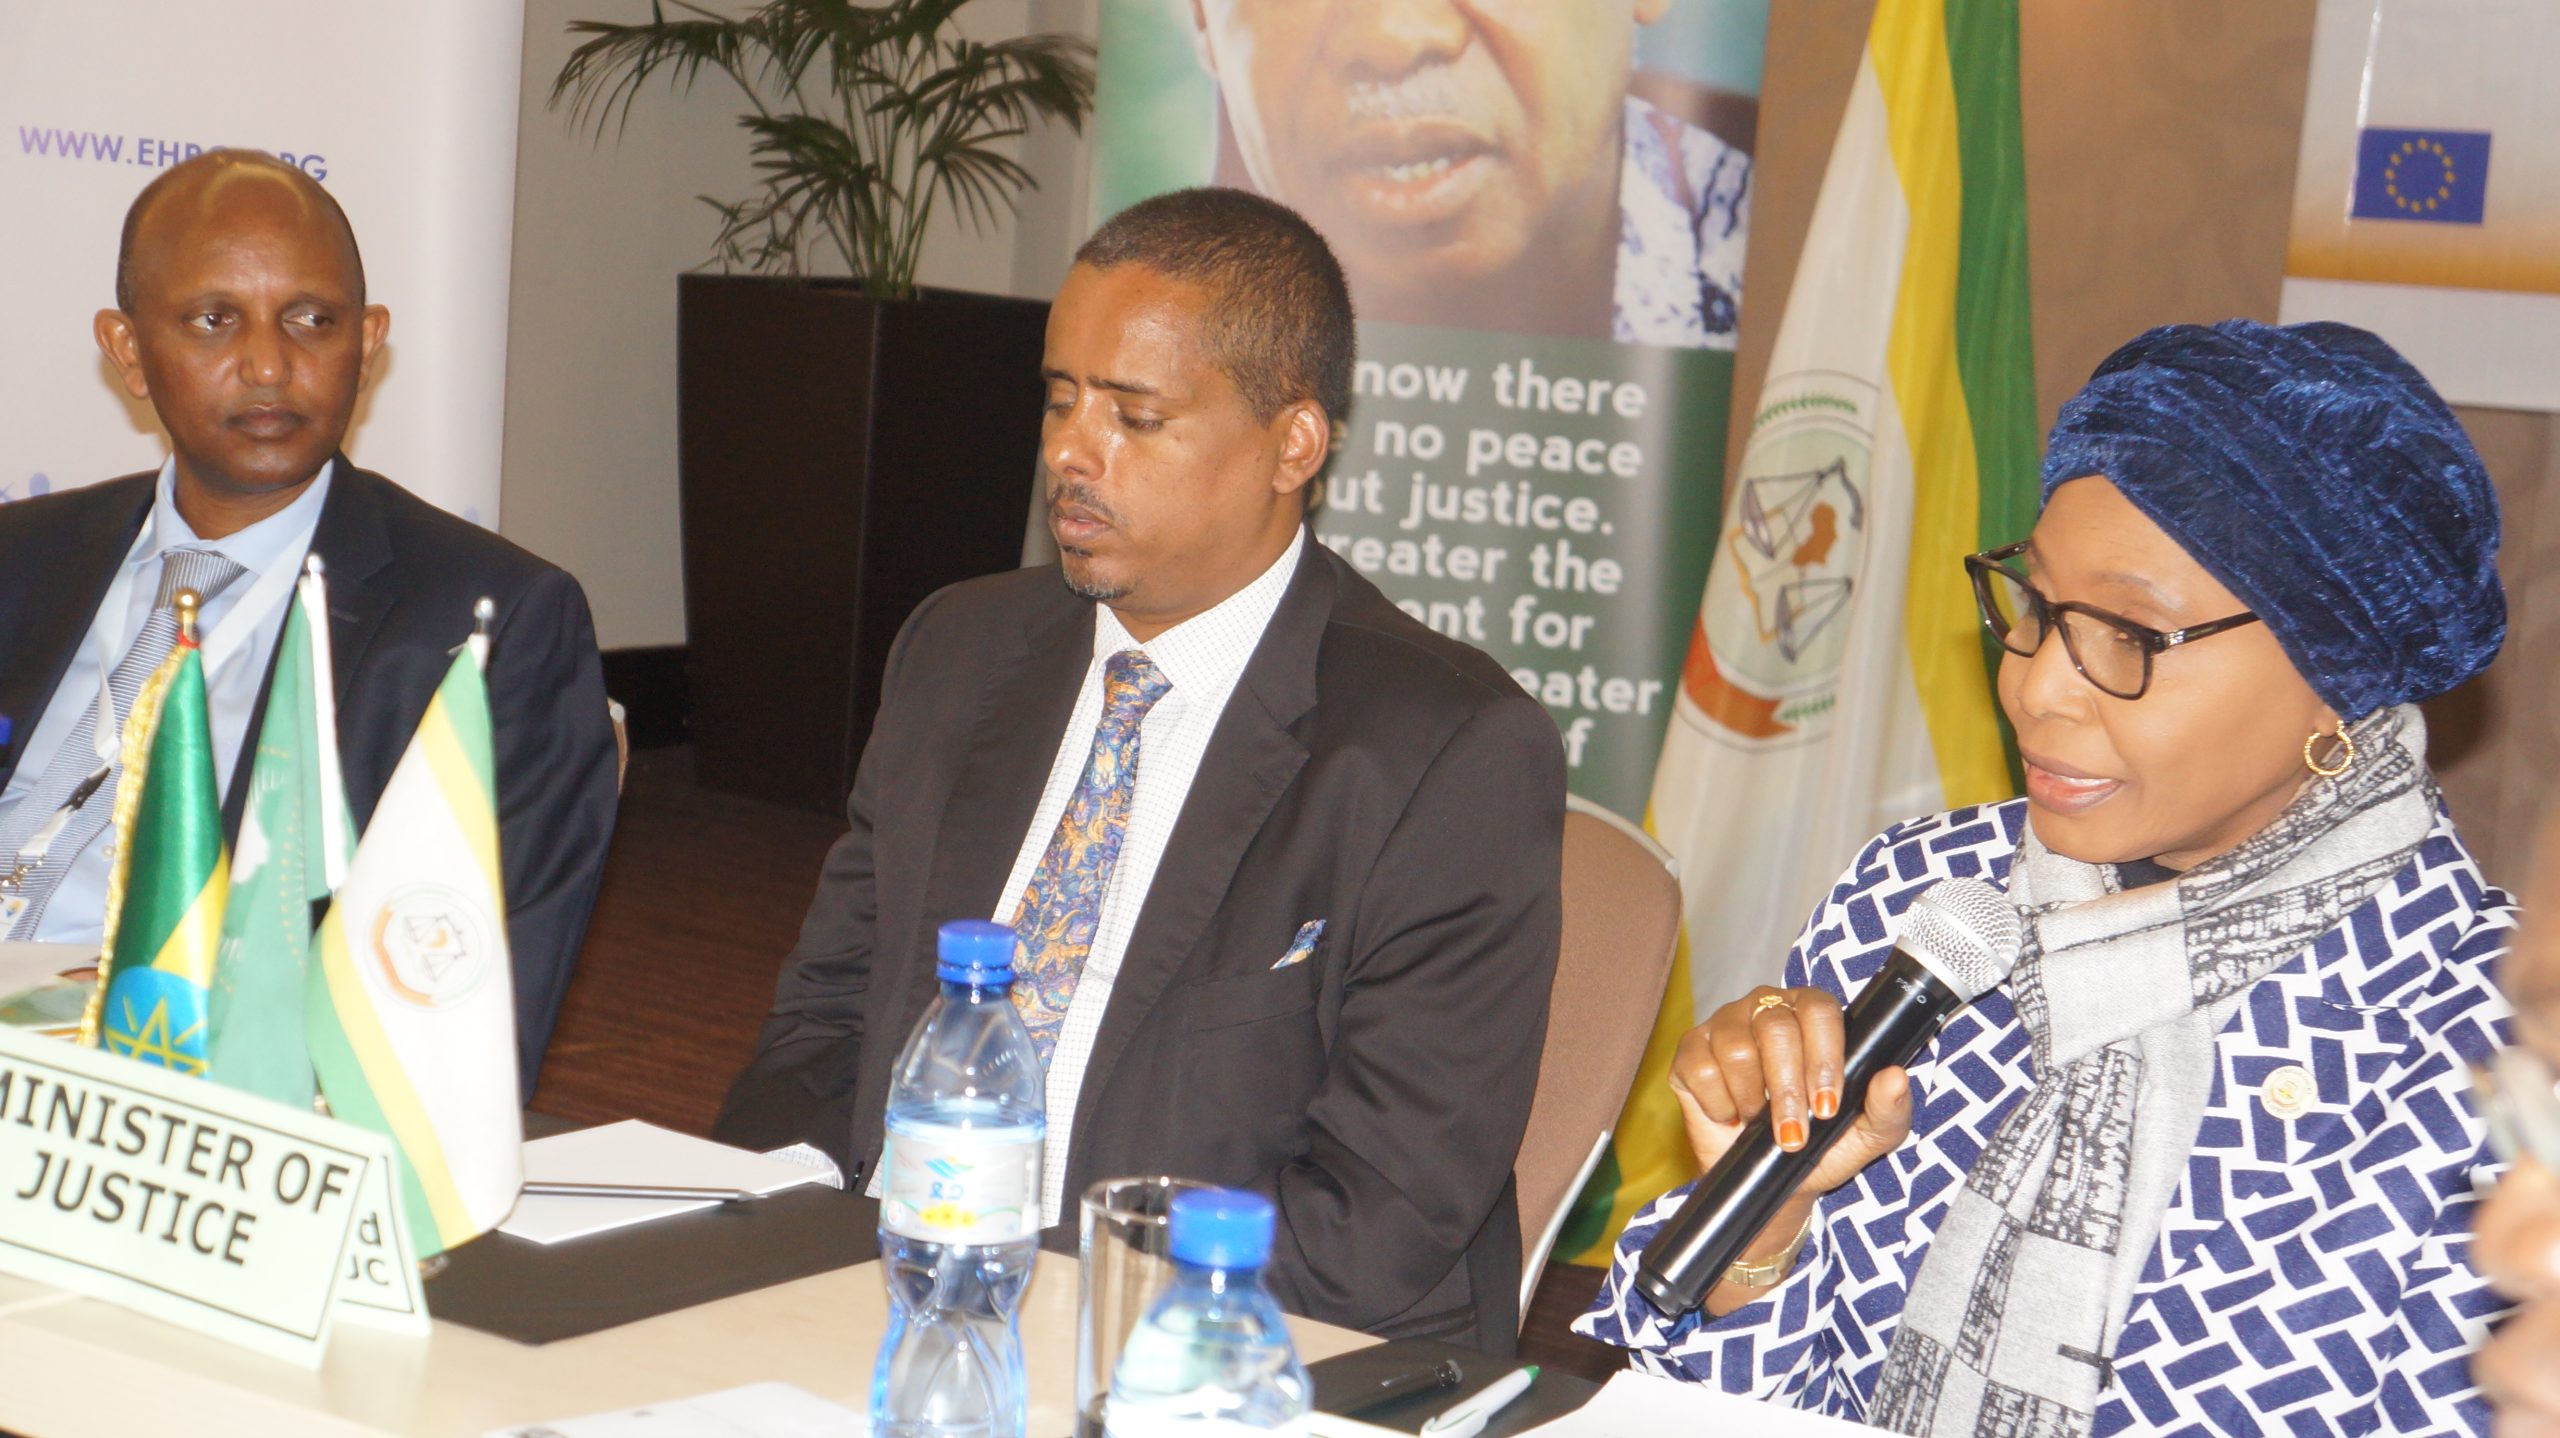 SENSITIZATION SEMINAR TO ETHIOPIA: OPENING STATEMENT OF HER EXCELLENCY IMANI D. ABOUD, PRESIDENT OF THE AFRICAN COURT ON HUMAN AND PEOPLES’ RIGHTS